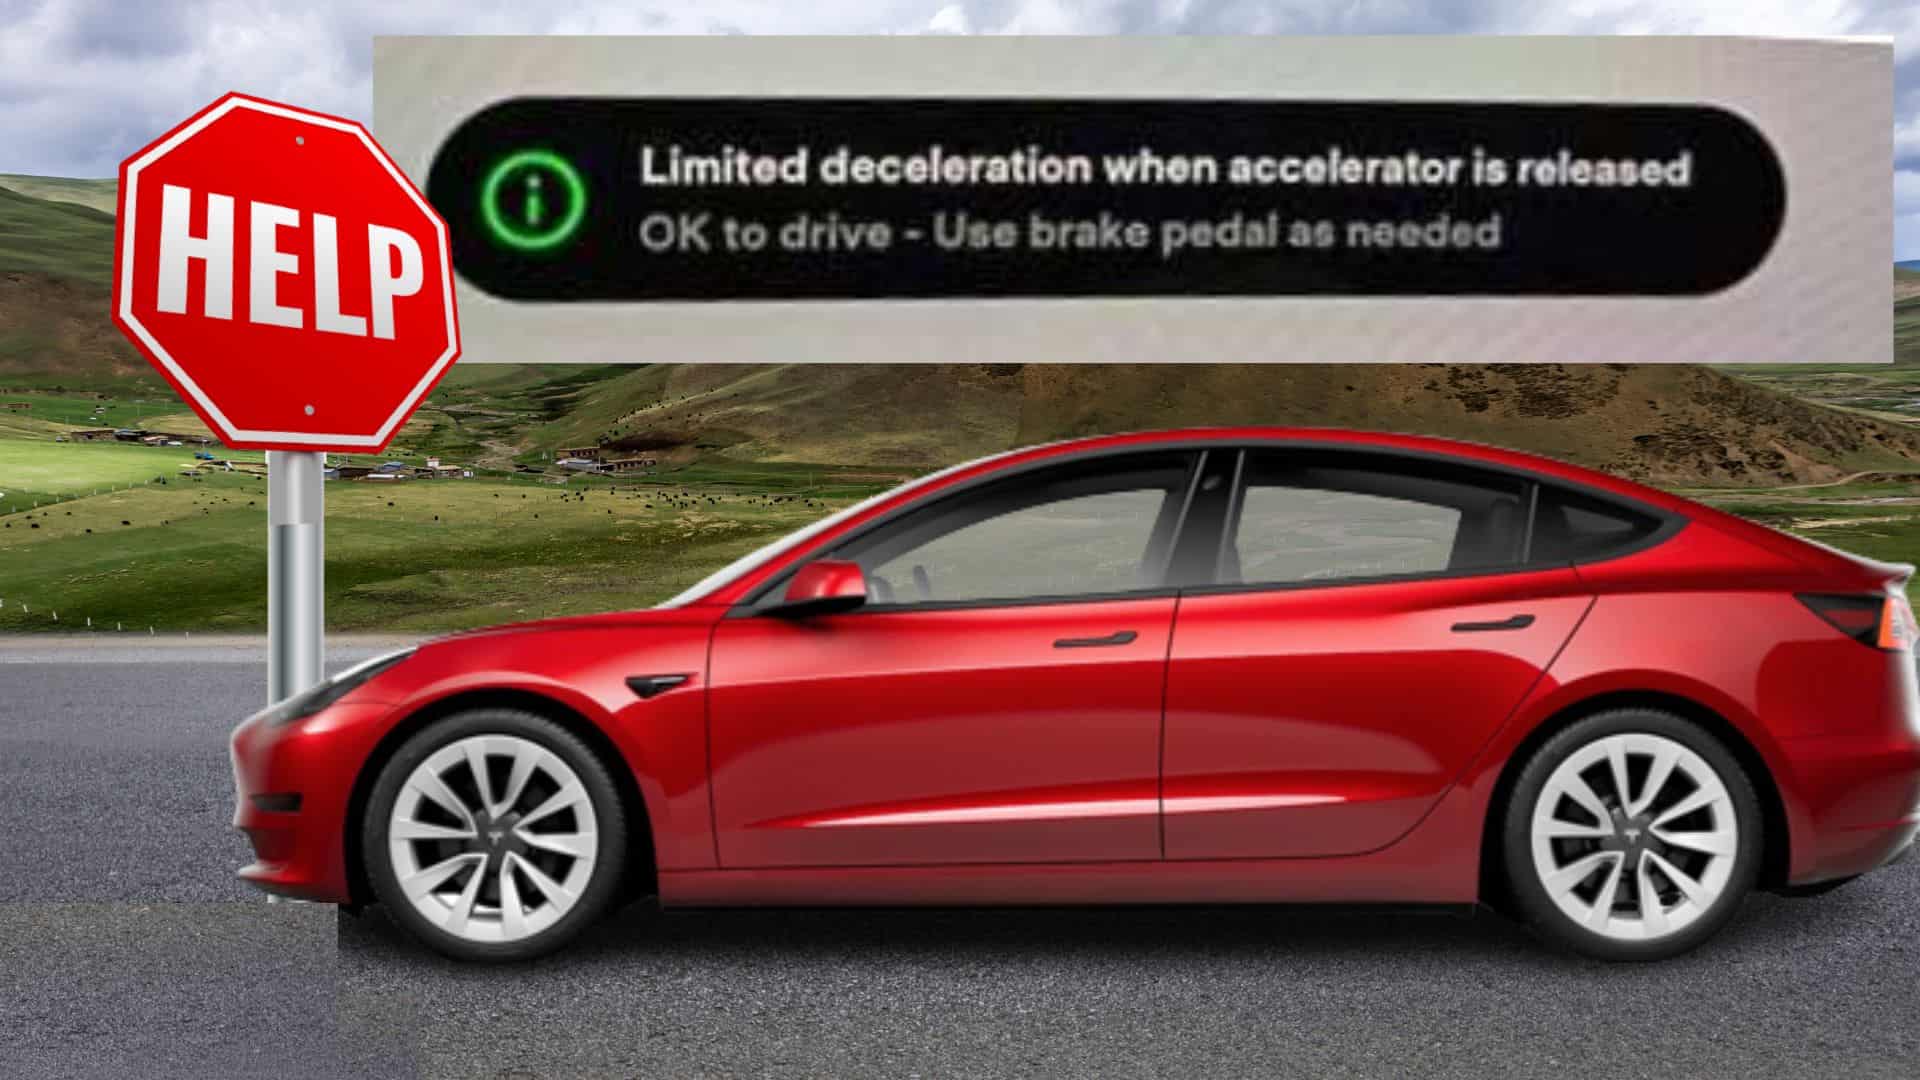 Limited deceleration when accelerator is released